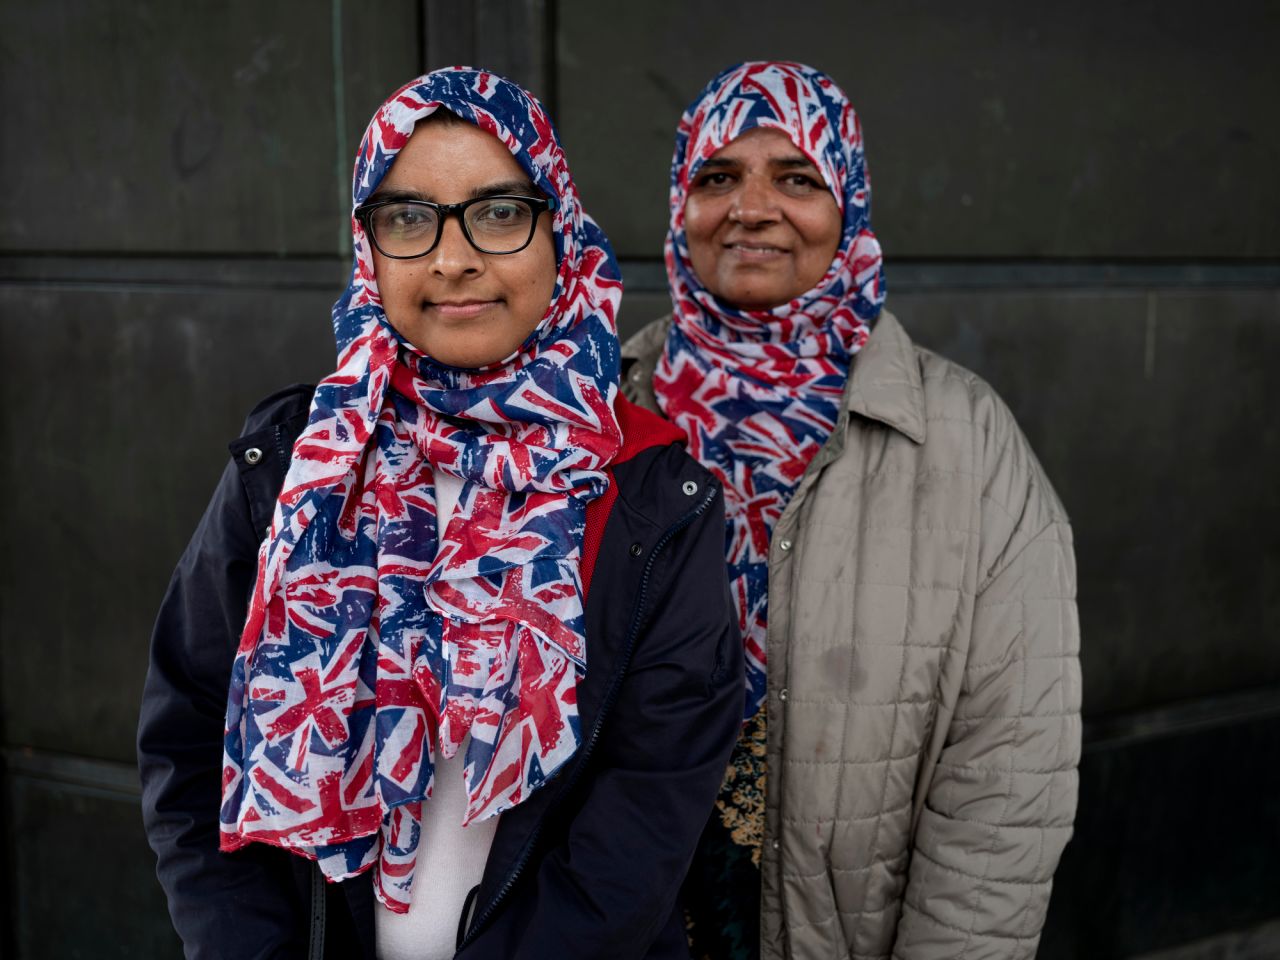 Farkhanda Ahmed and her mother, Shakeela, came from Slough, a town in Berkshire, England. 